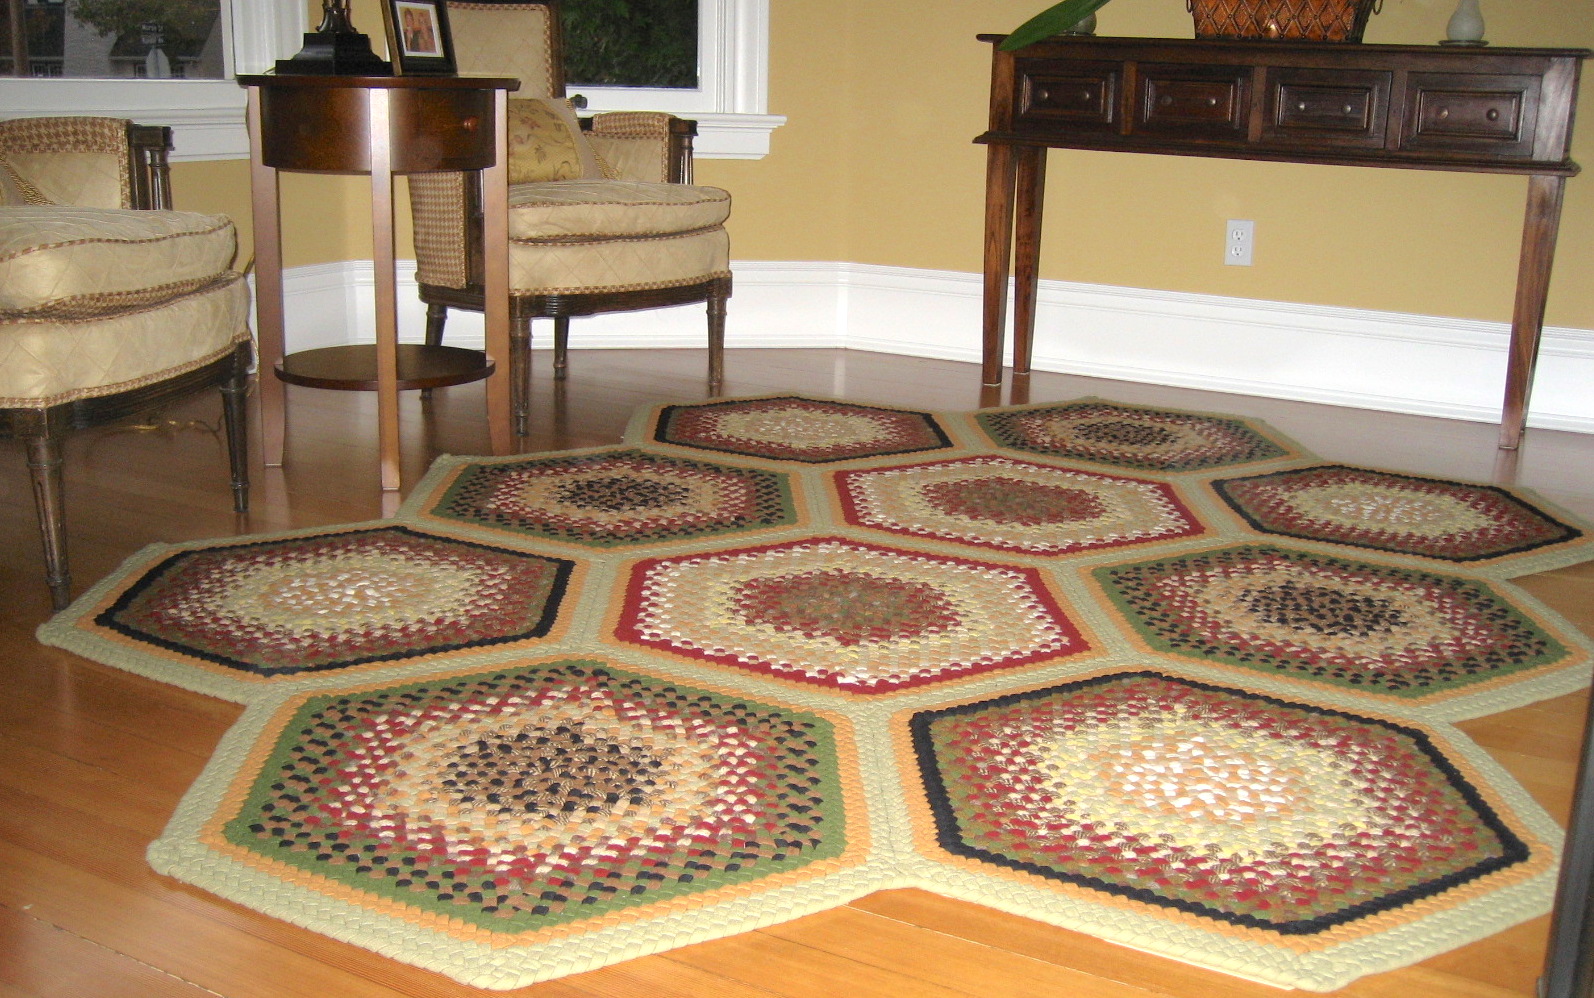 Log Cabin Step Cotton Braided Rugs by Homespice Decor - Lake Erie Gifts &  Decor